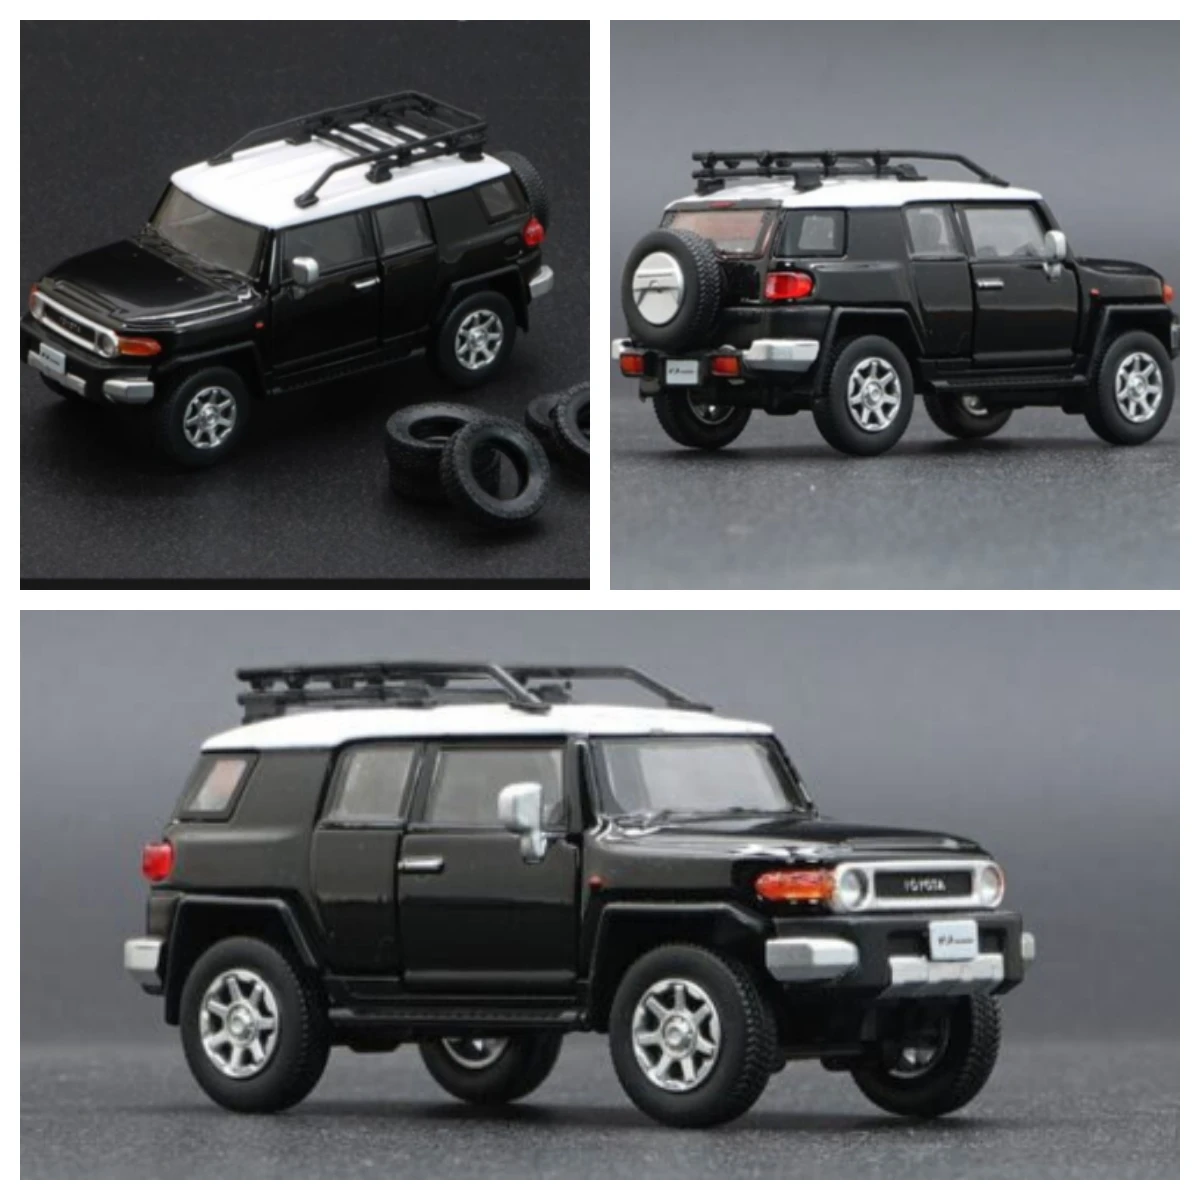 

BM Creations FJ Cruiser - Black 1:64 Scale Diecast Model Car Collection Limited Edition Hobby Toys